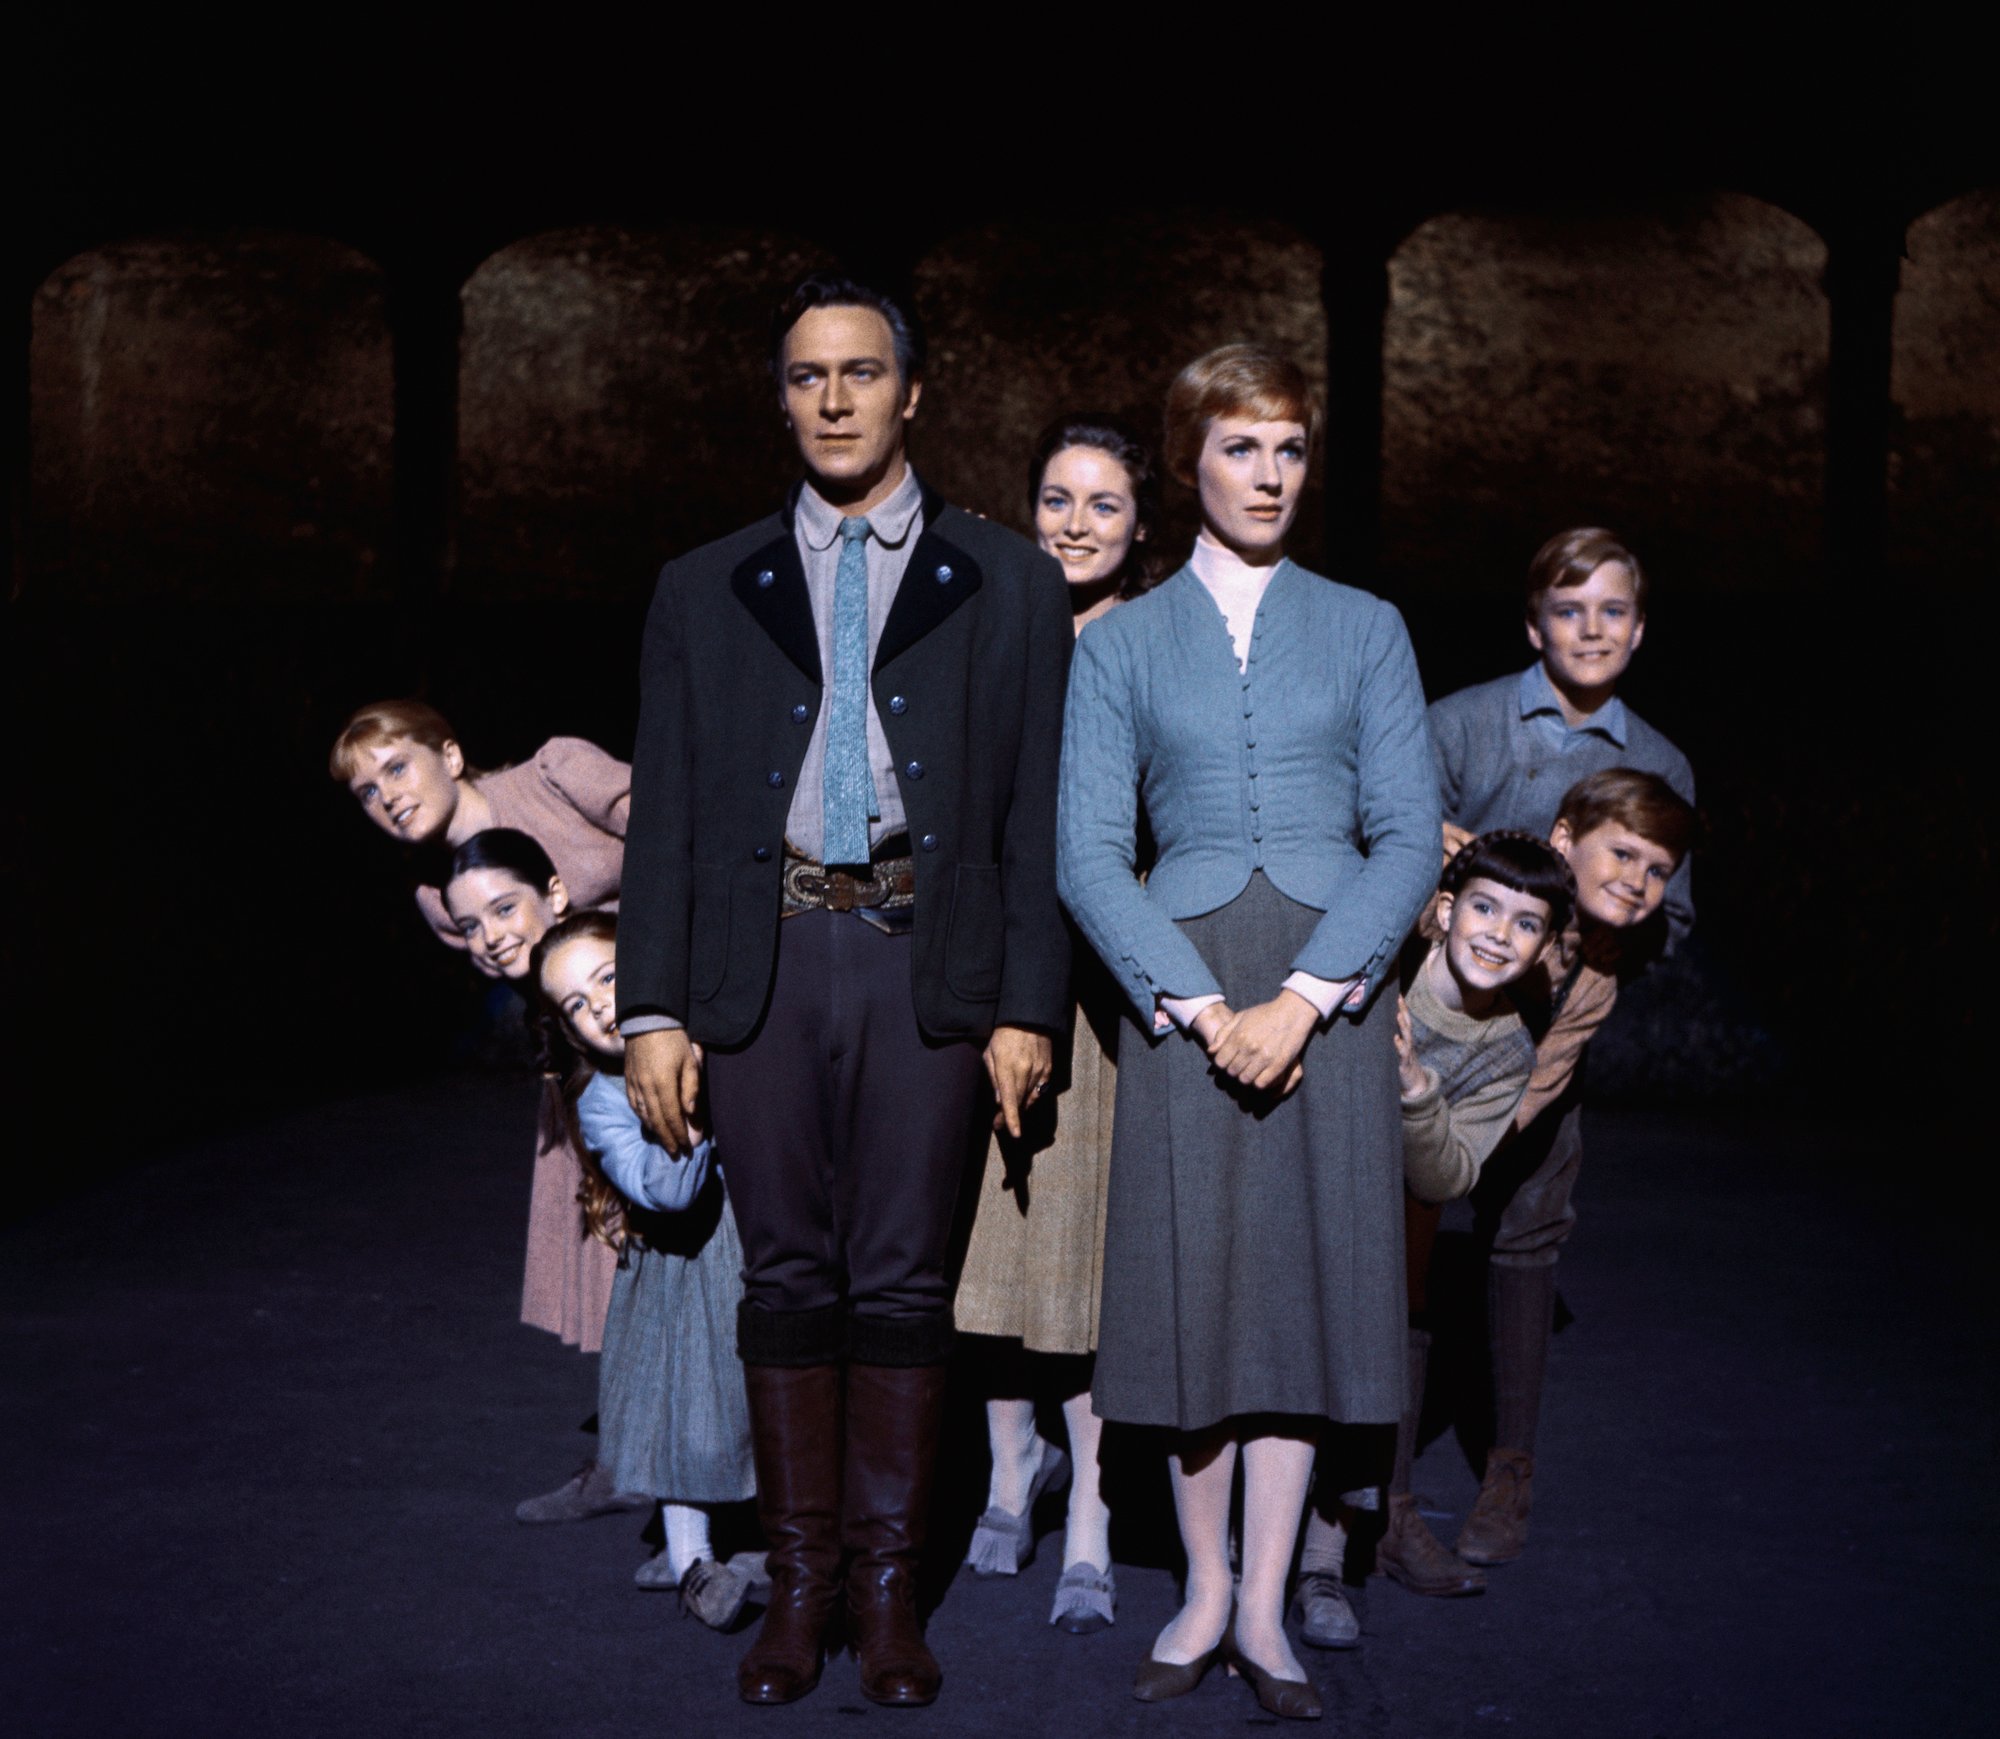 Julie Andrews and Christopher Plummer surrounded on all sides by the Von Trapp children from 'Sound of Music'